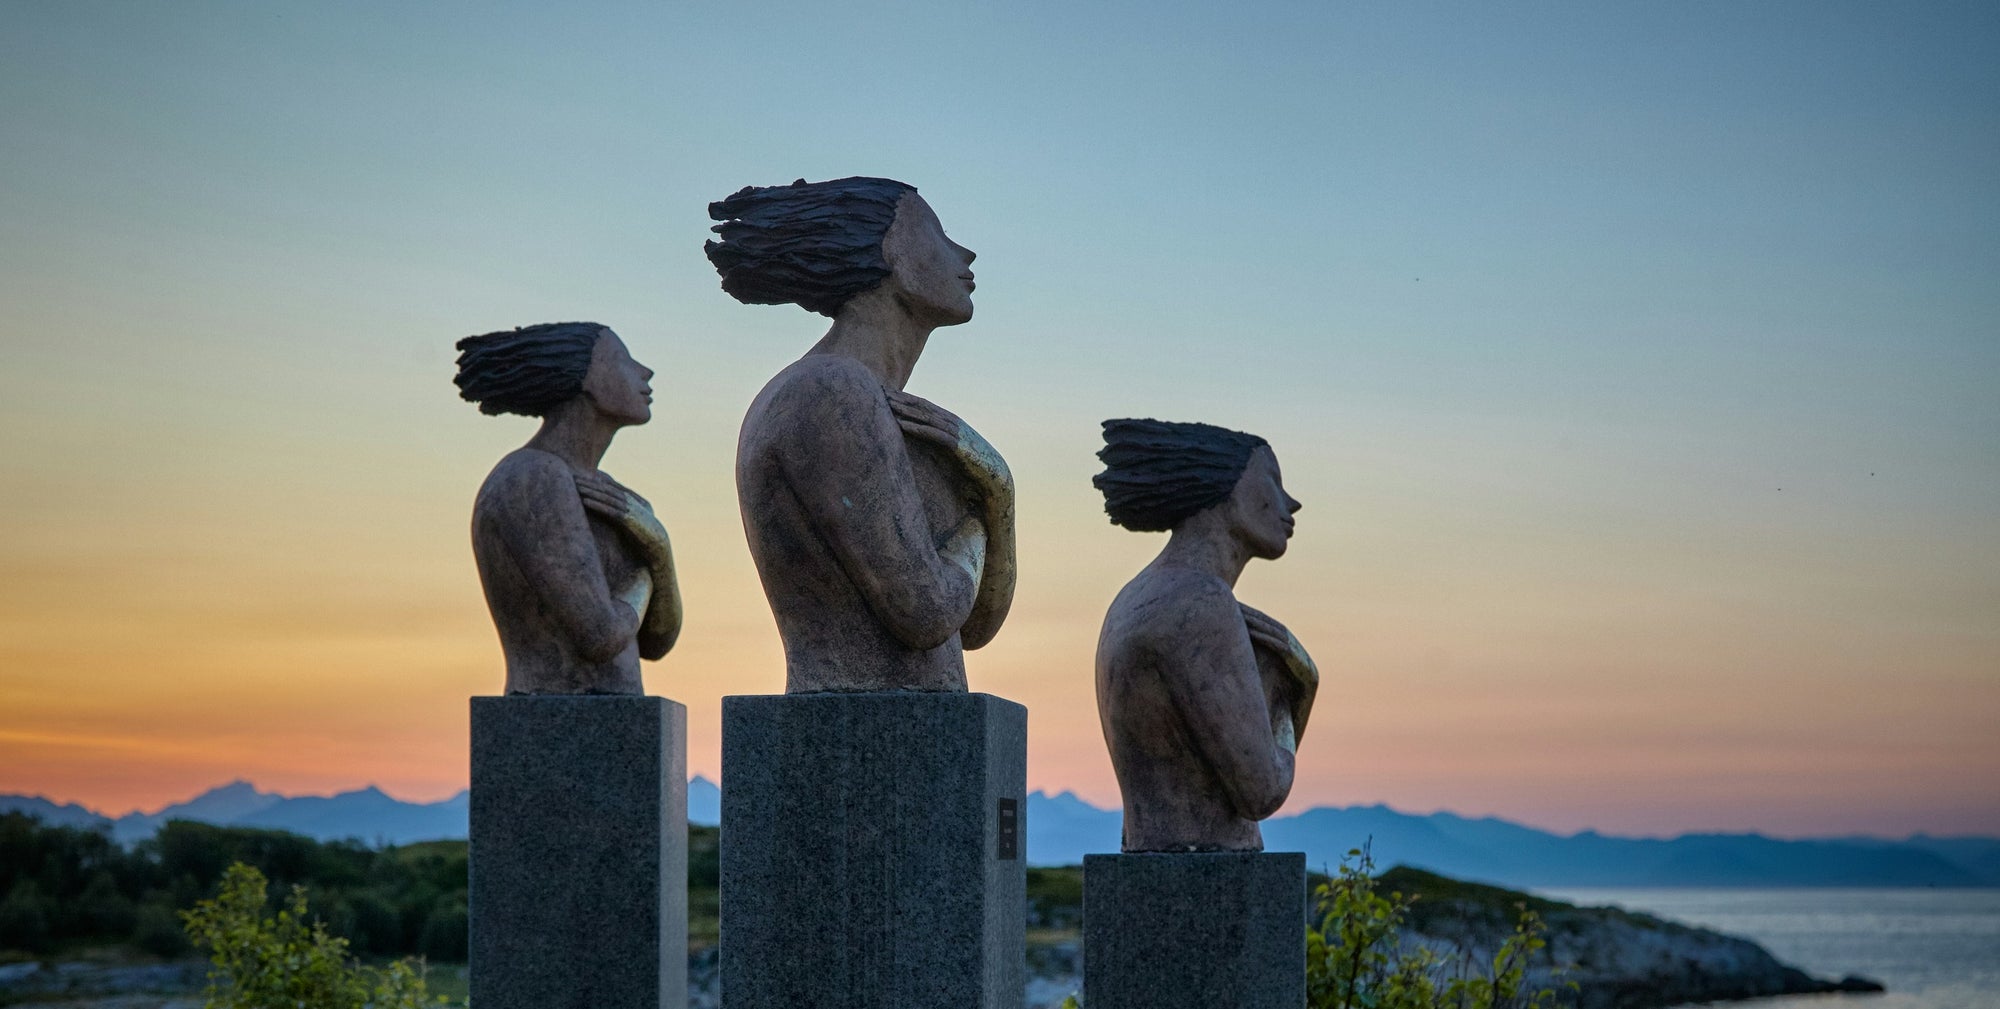 Three statues of women with hair blowing in the breeze